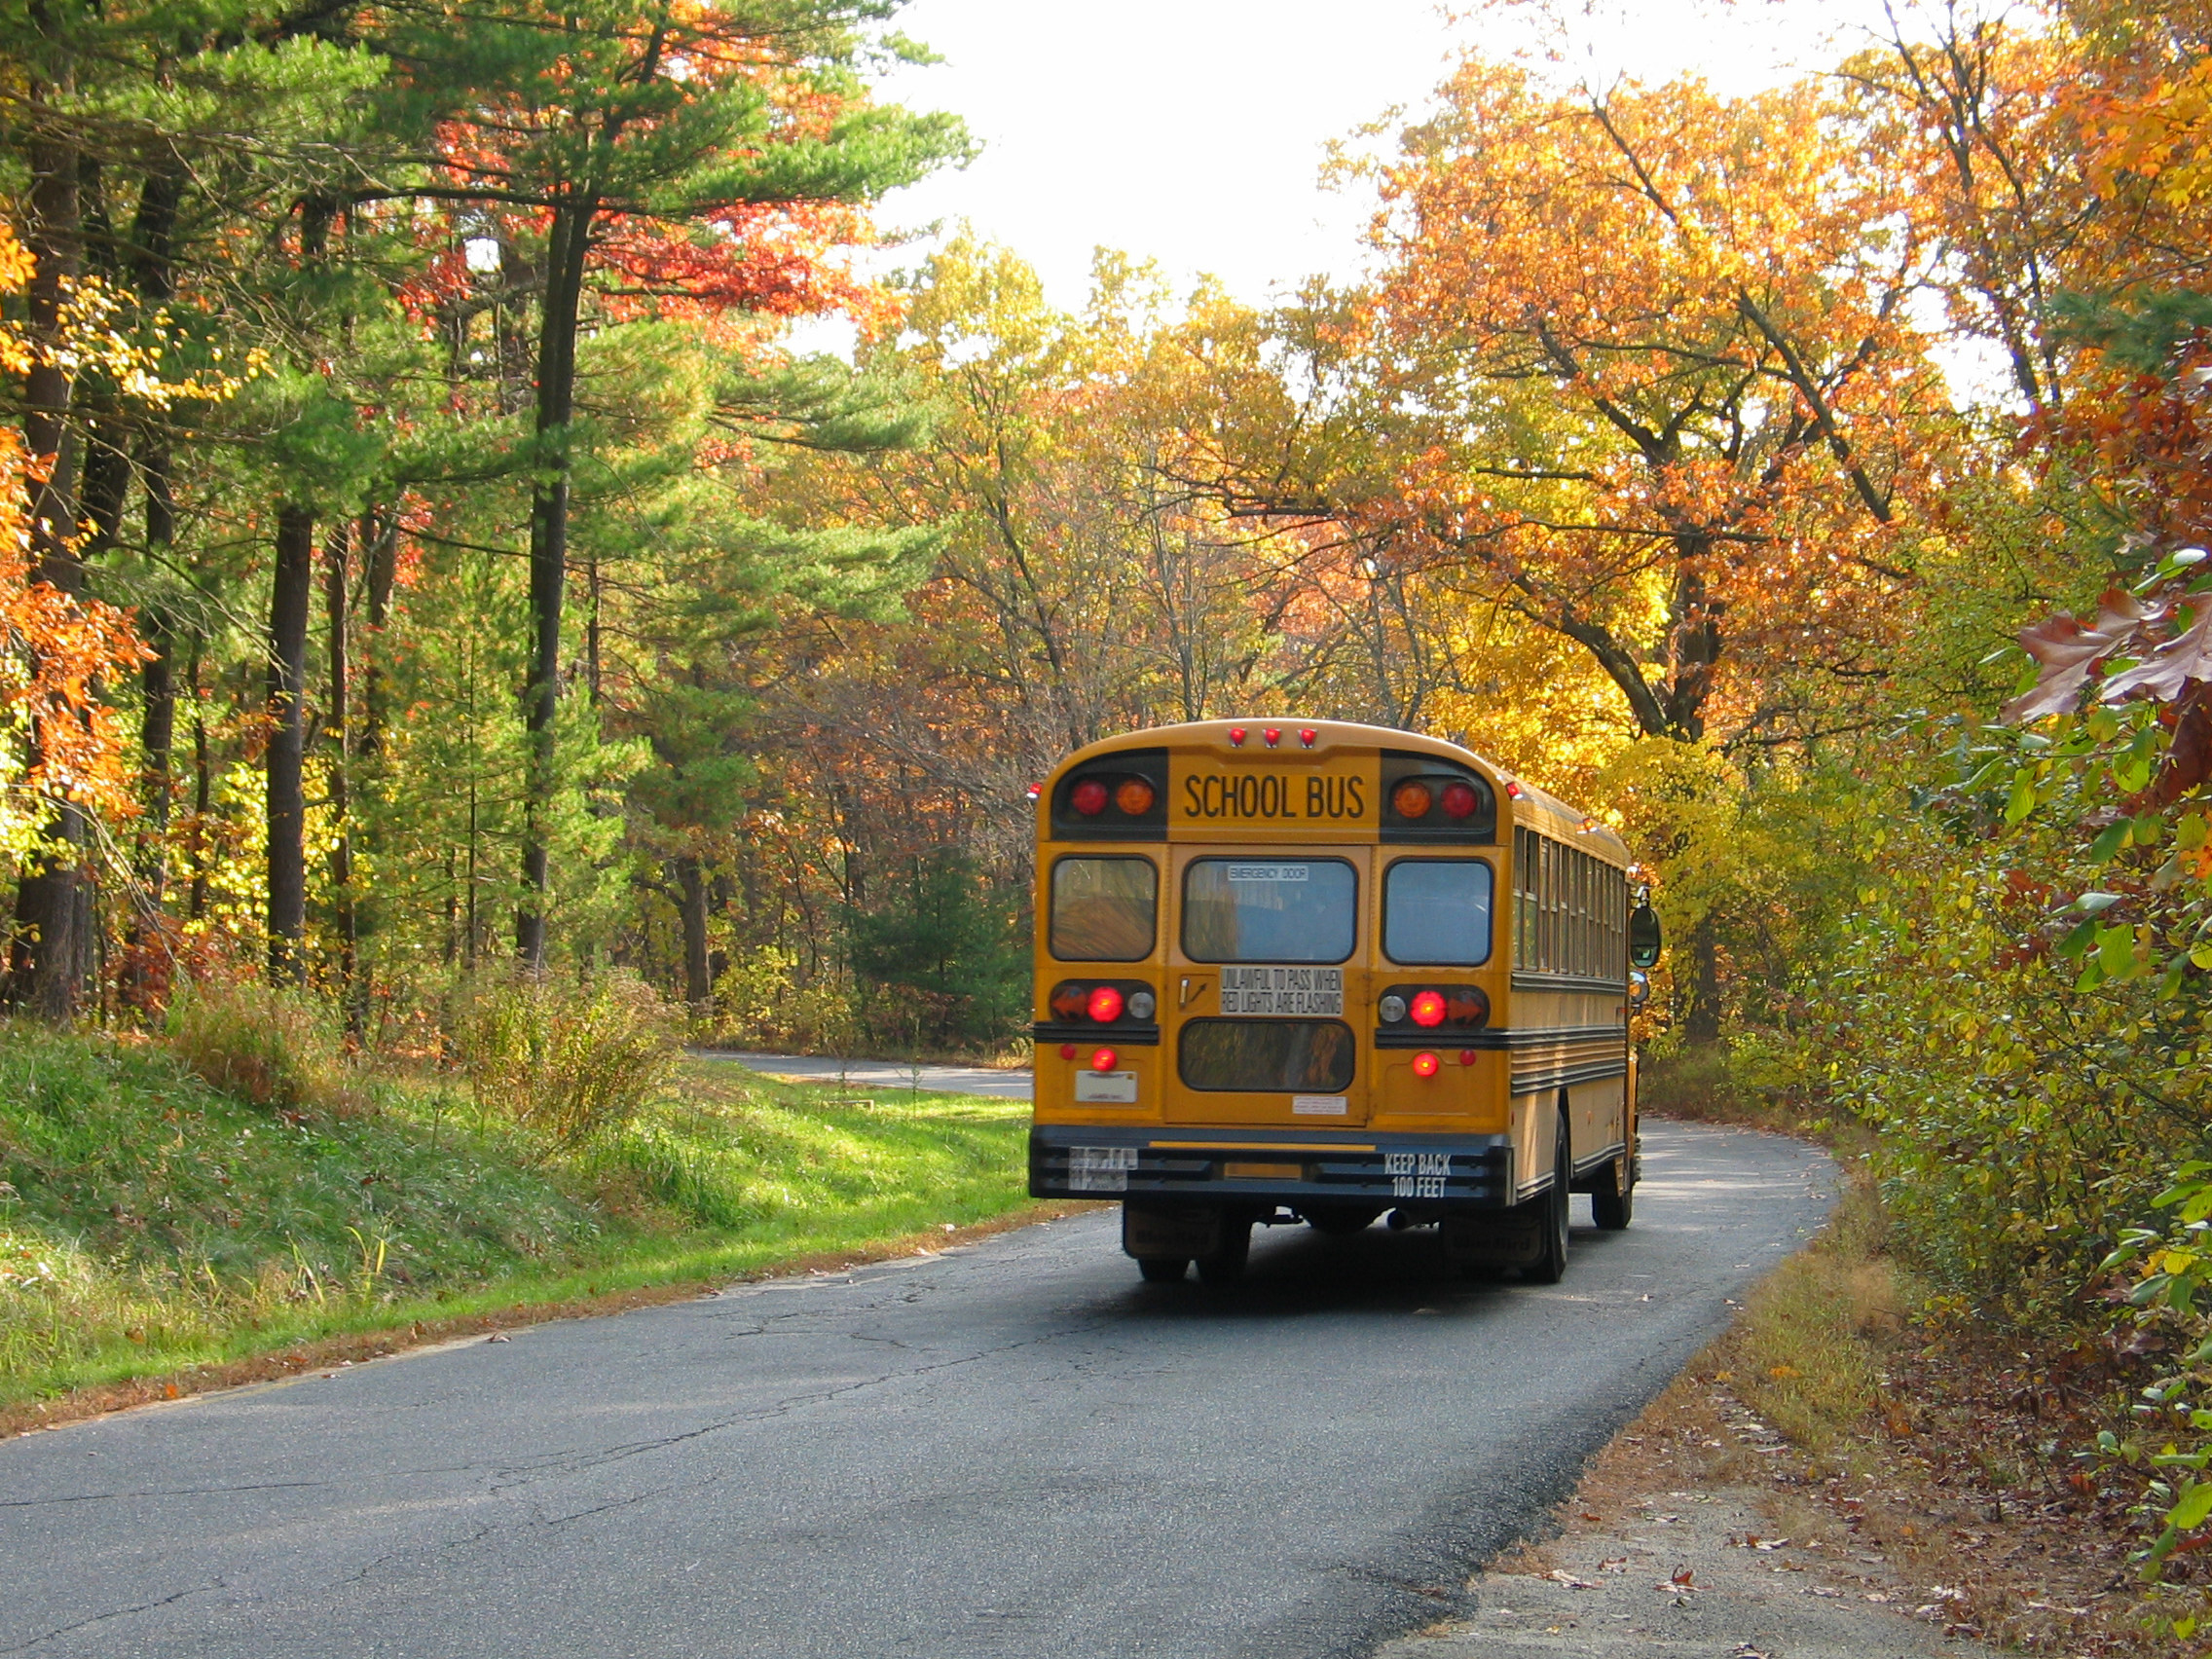 A school bus driving on a road during fall